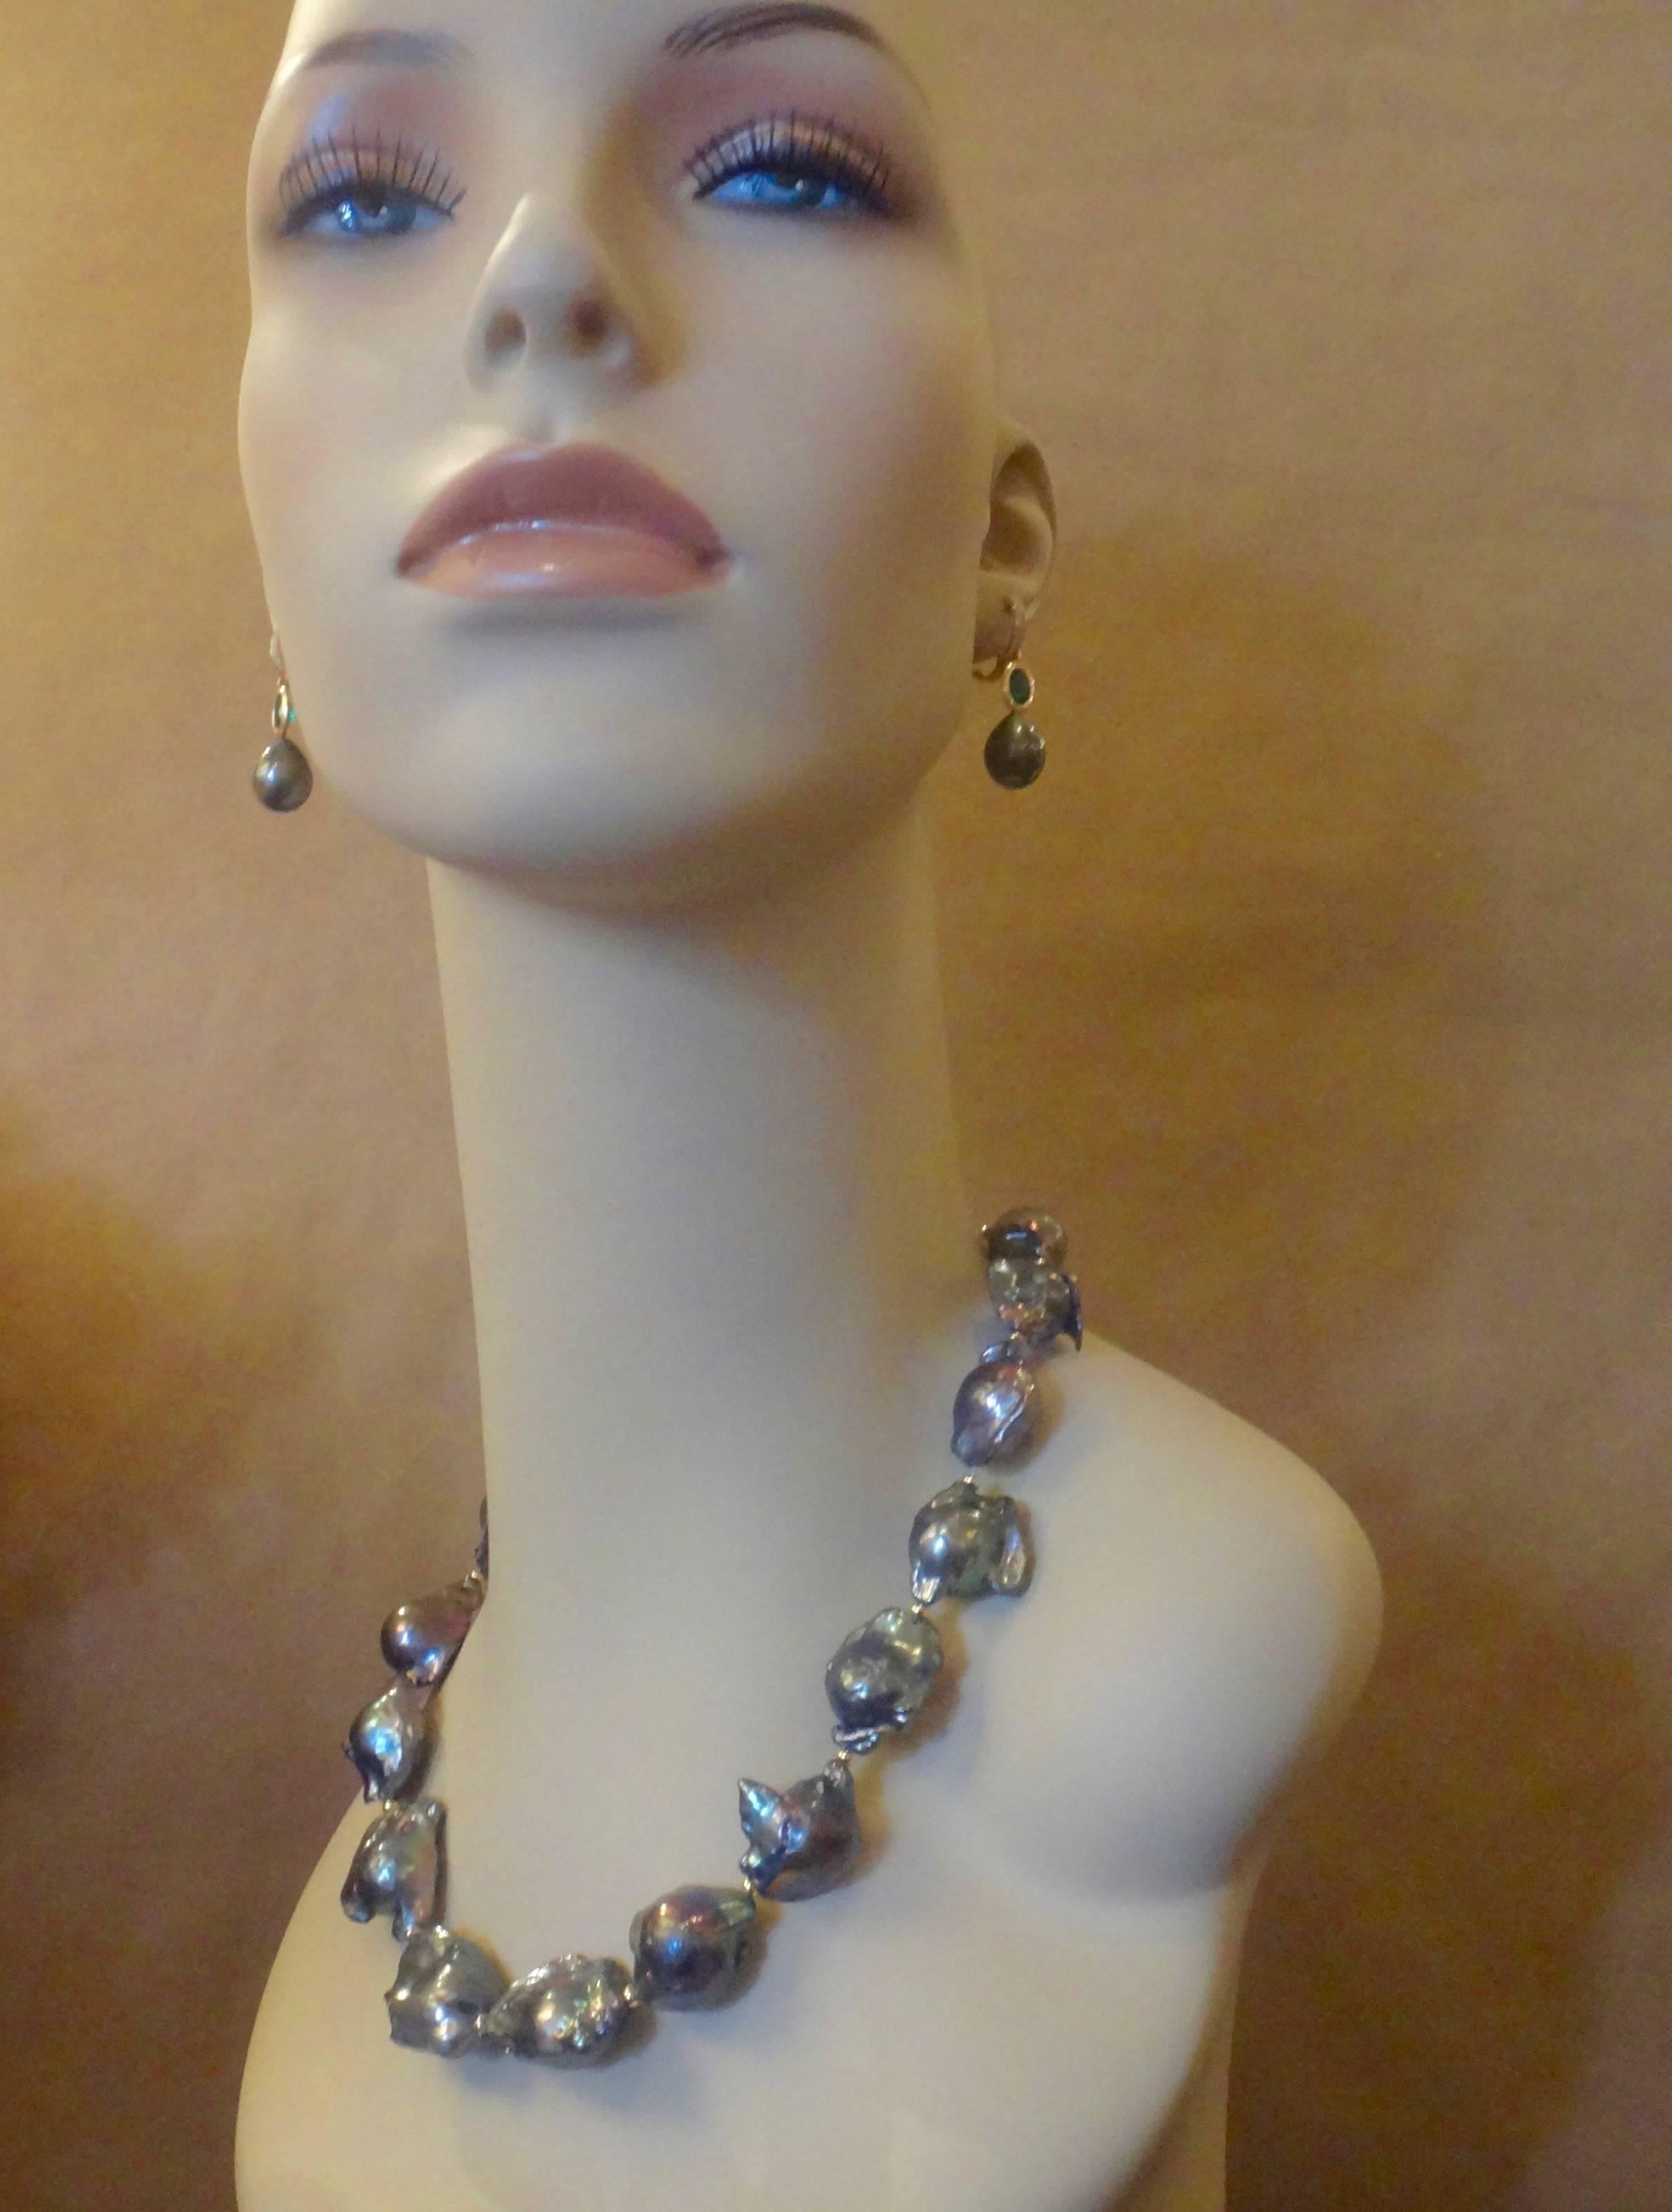 Sixteen very baroque dark gray cultured pearls form this bold necklace.  The rich base color of the pearls reflects shades and tones of pinks, blues and greens.  The pearls are spaced with small gold beads. The  necklace is finished with a vermeil